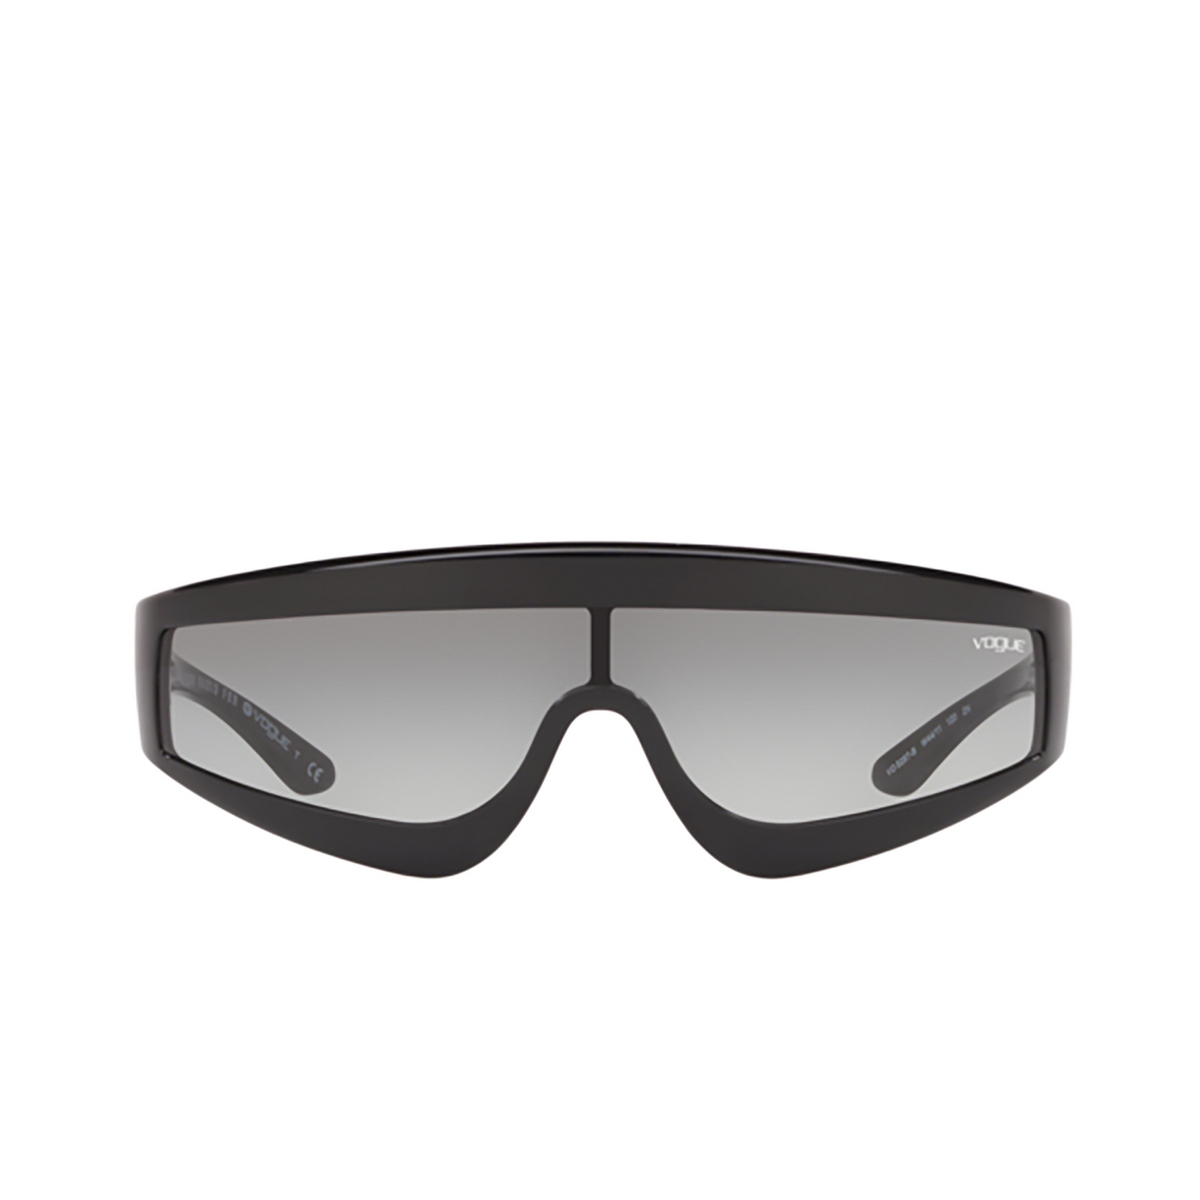 Vogue® Mask Sunglasses: Zoom-in VO5257S color Black W44/11 - front view.